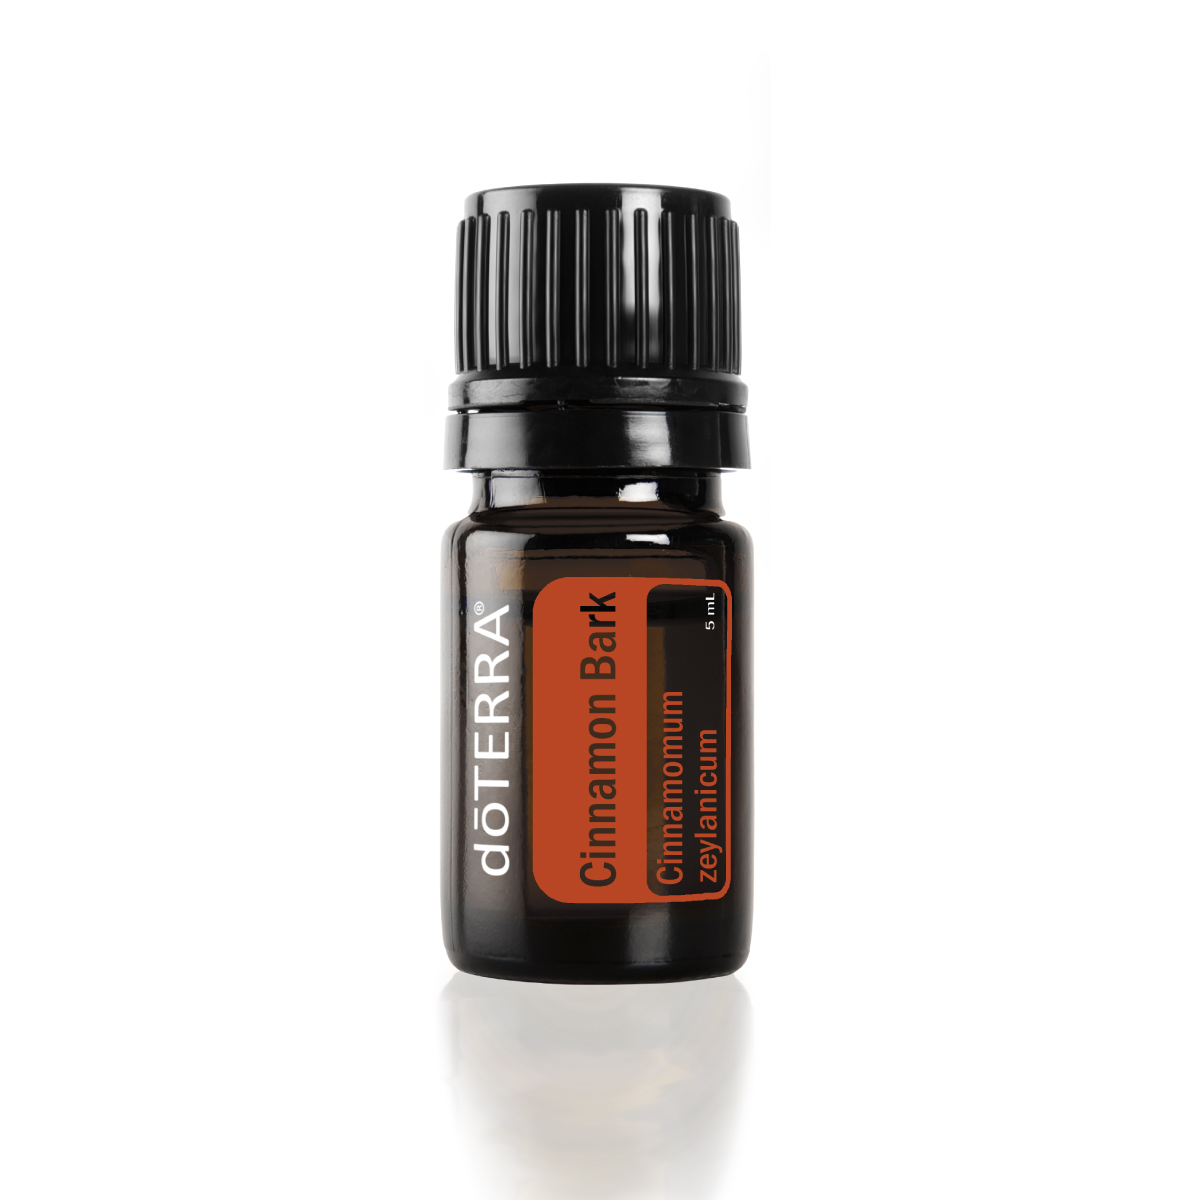 Bottle of doTERRA Cinnamon oil. What are the benefits of cinnamon oil? Cinnamon bark oil has several internal benefits for the body, plus, it has a distinct and powerful aroma.